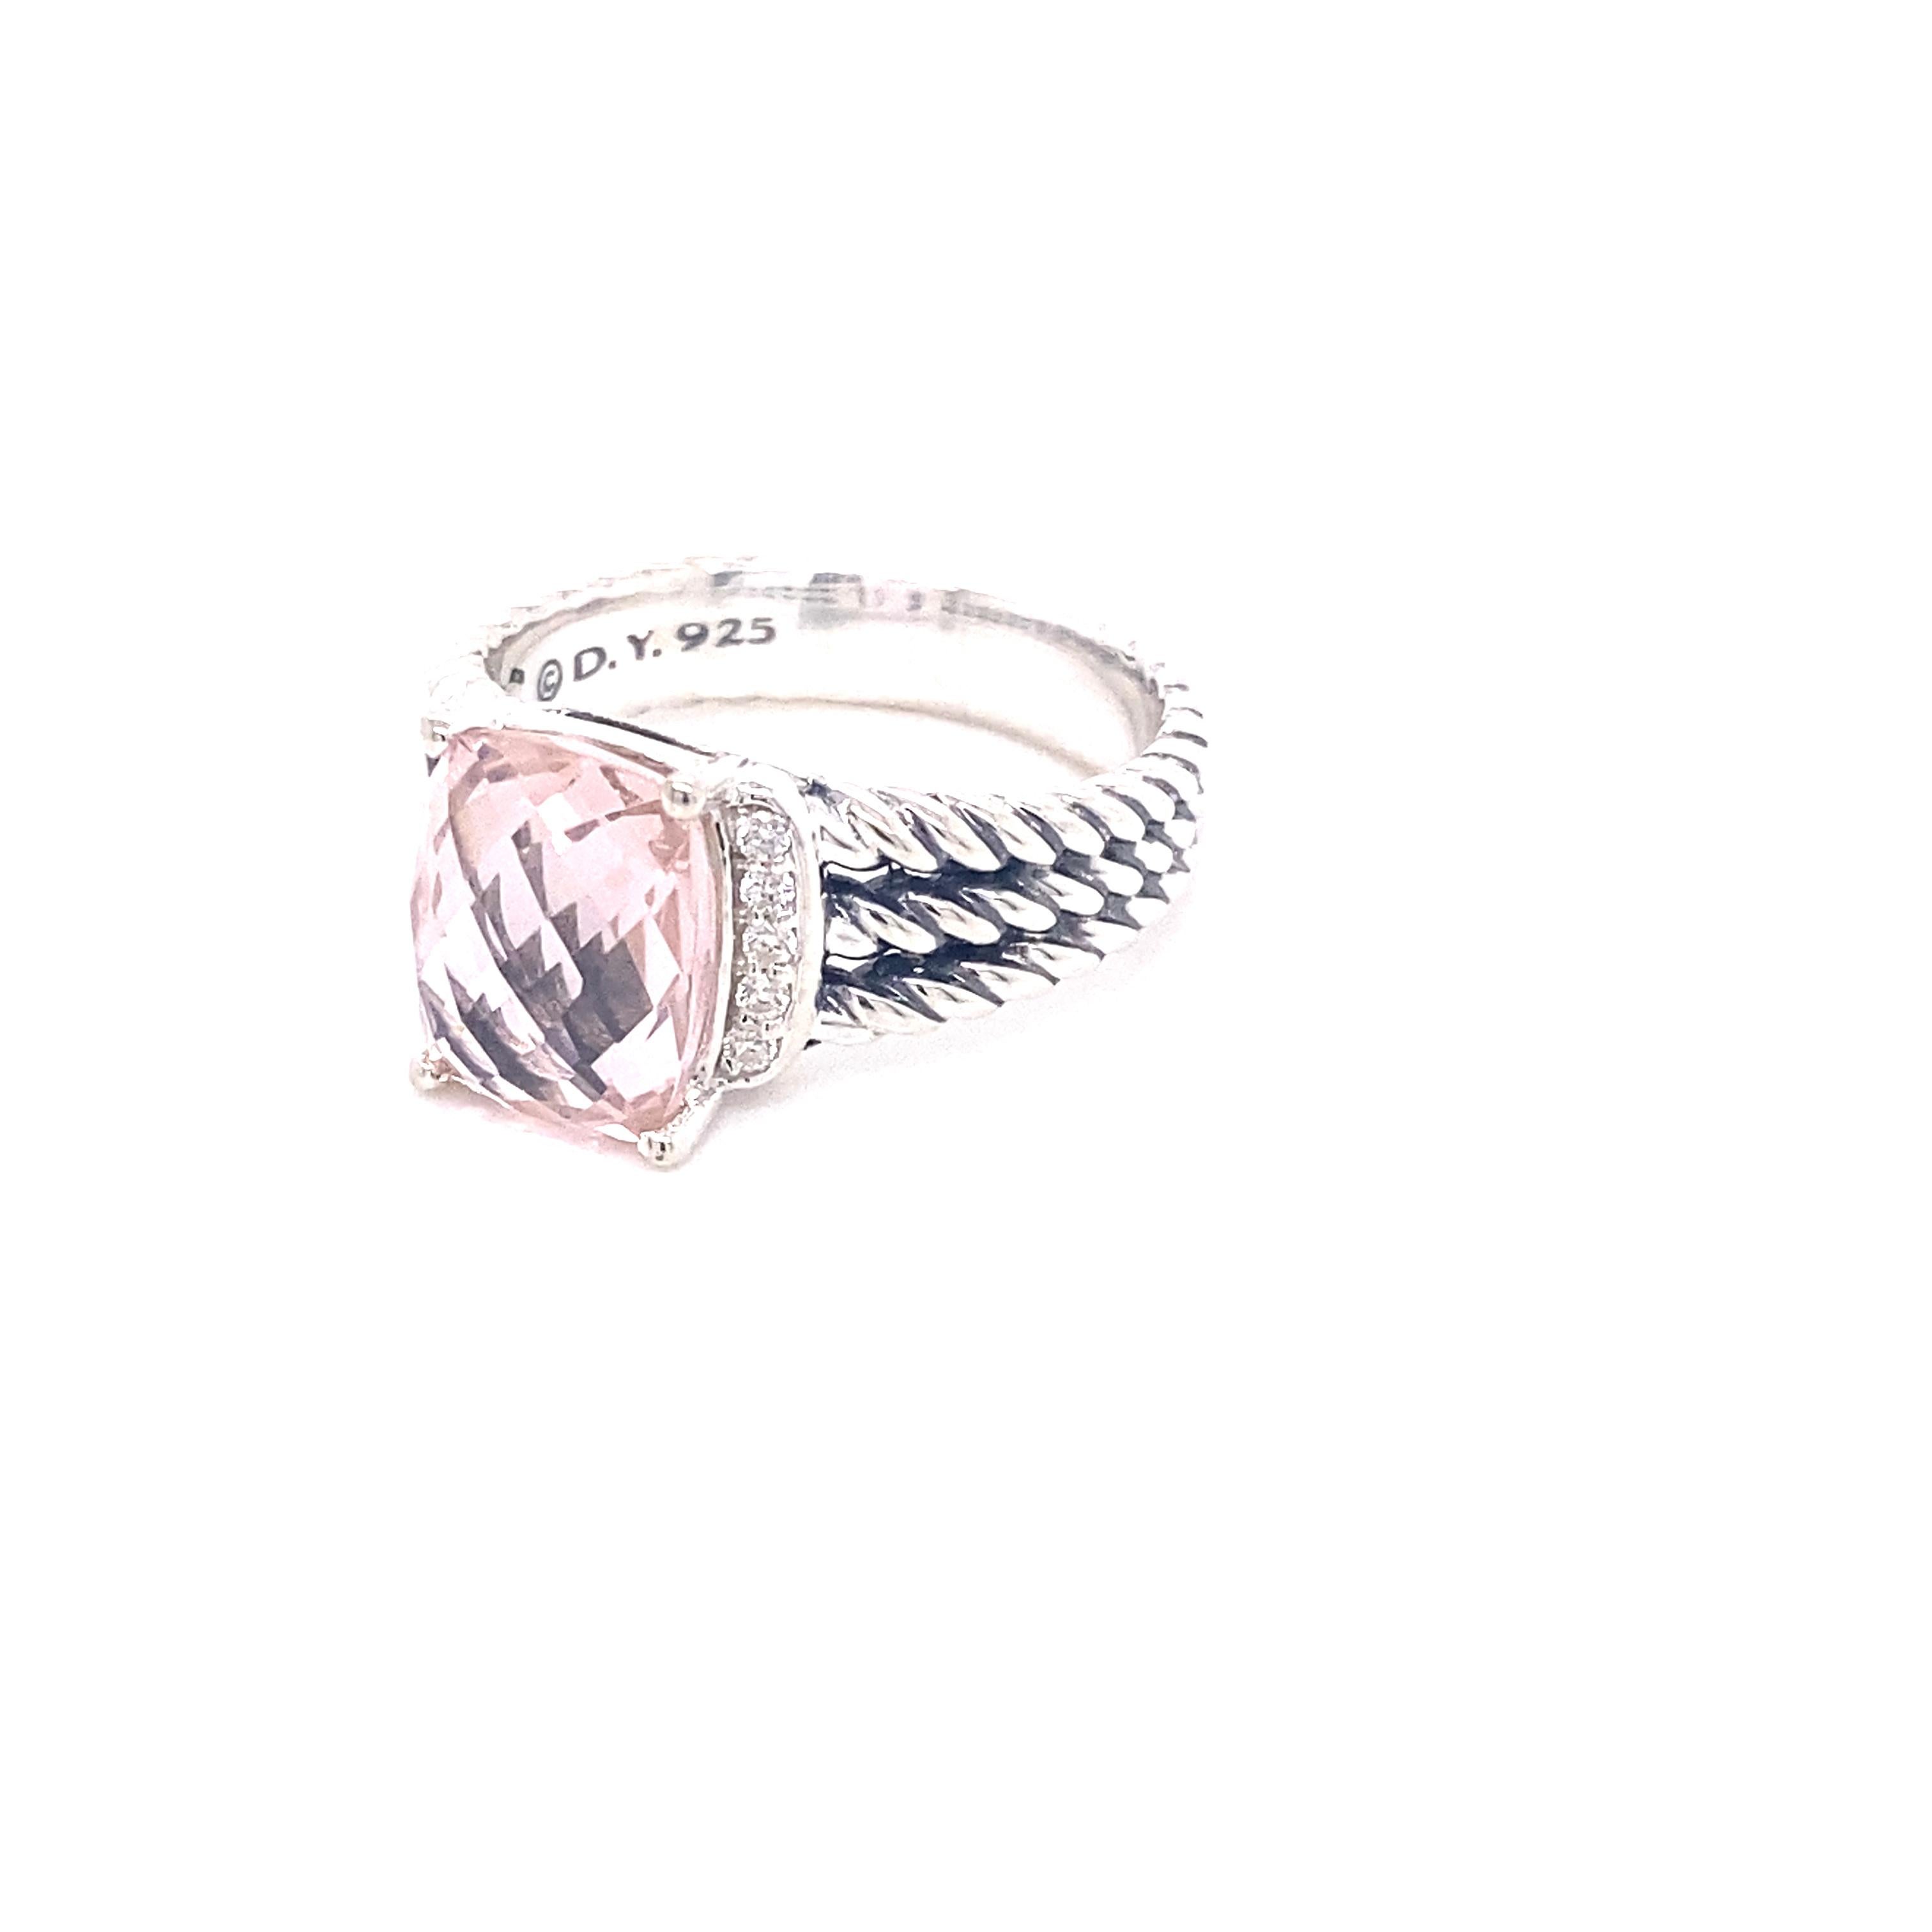 This classic David Yurman ring features a faceted morganite stone at the center accentuated with .08ctw pave diamonds set on a triple cable band crafted in sterling silver.  It is currently a size 7.5 but can be resized upon request. 
Morganite: 10